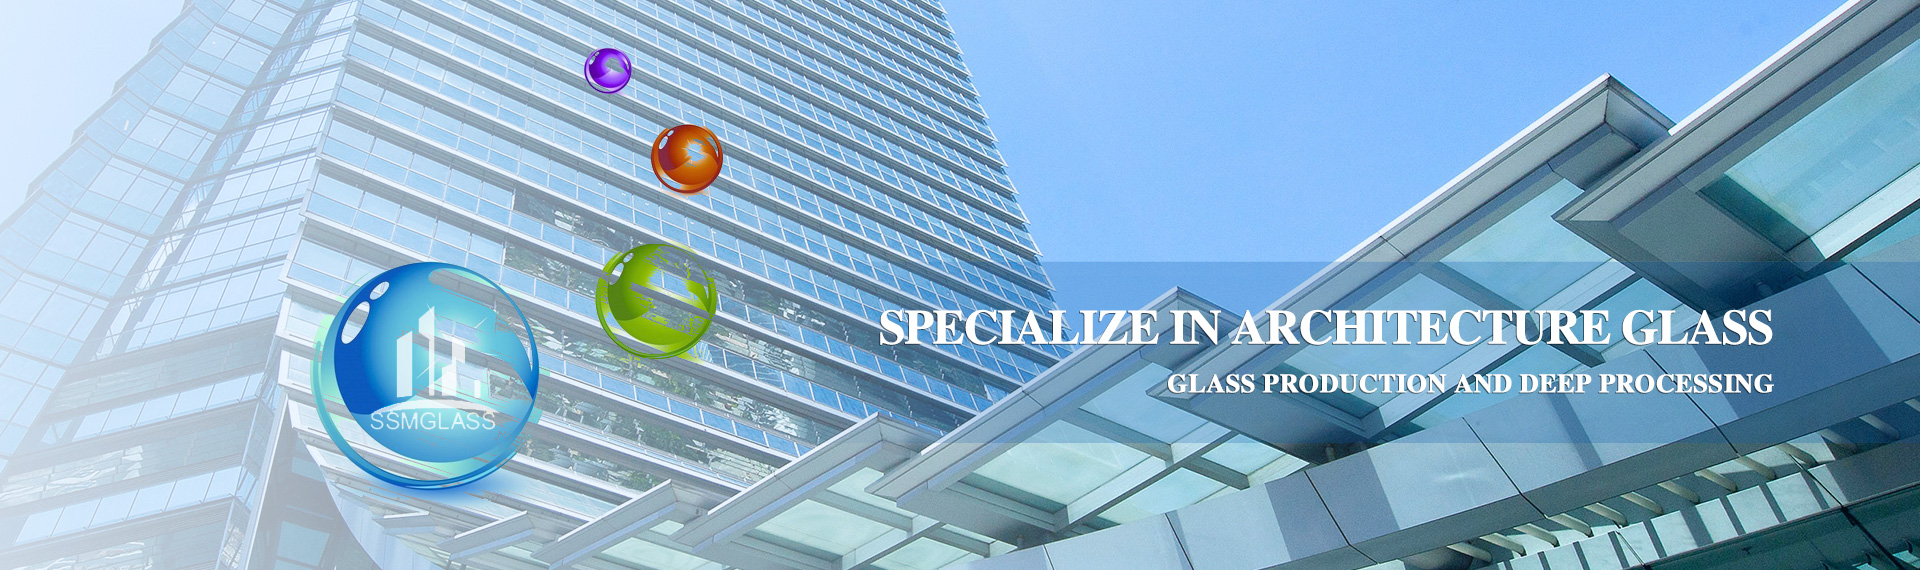 1-SSMGLASS Specialize In Architecture Glass